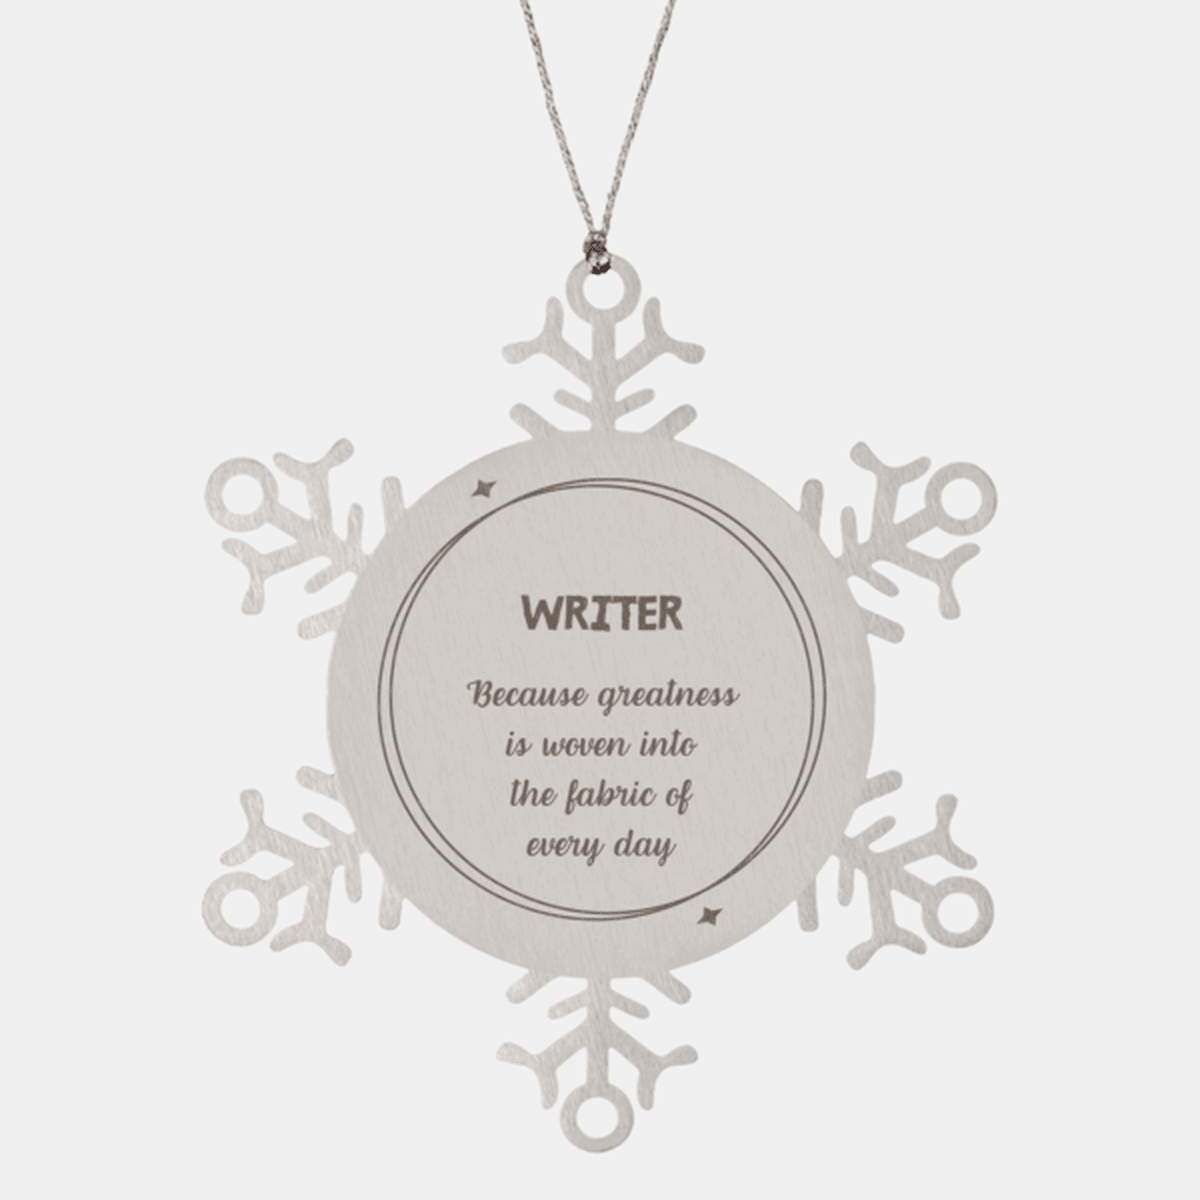 Sarcastic Writer Snowflake Ornament Gifts, Christmas Holiday Gifts for Writer Ornament, Writer: Because greatness is woven into the fabric of every day, Coworkers, Friends - Mallard Moon Gift Shop